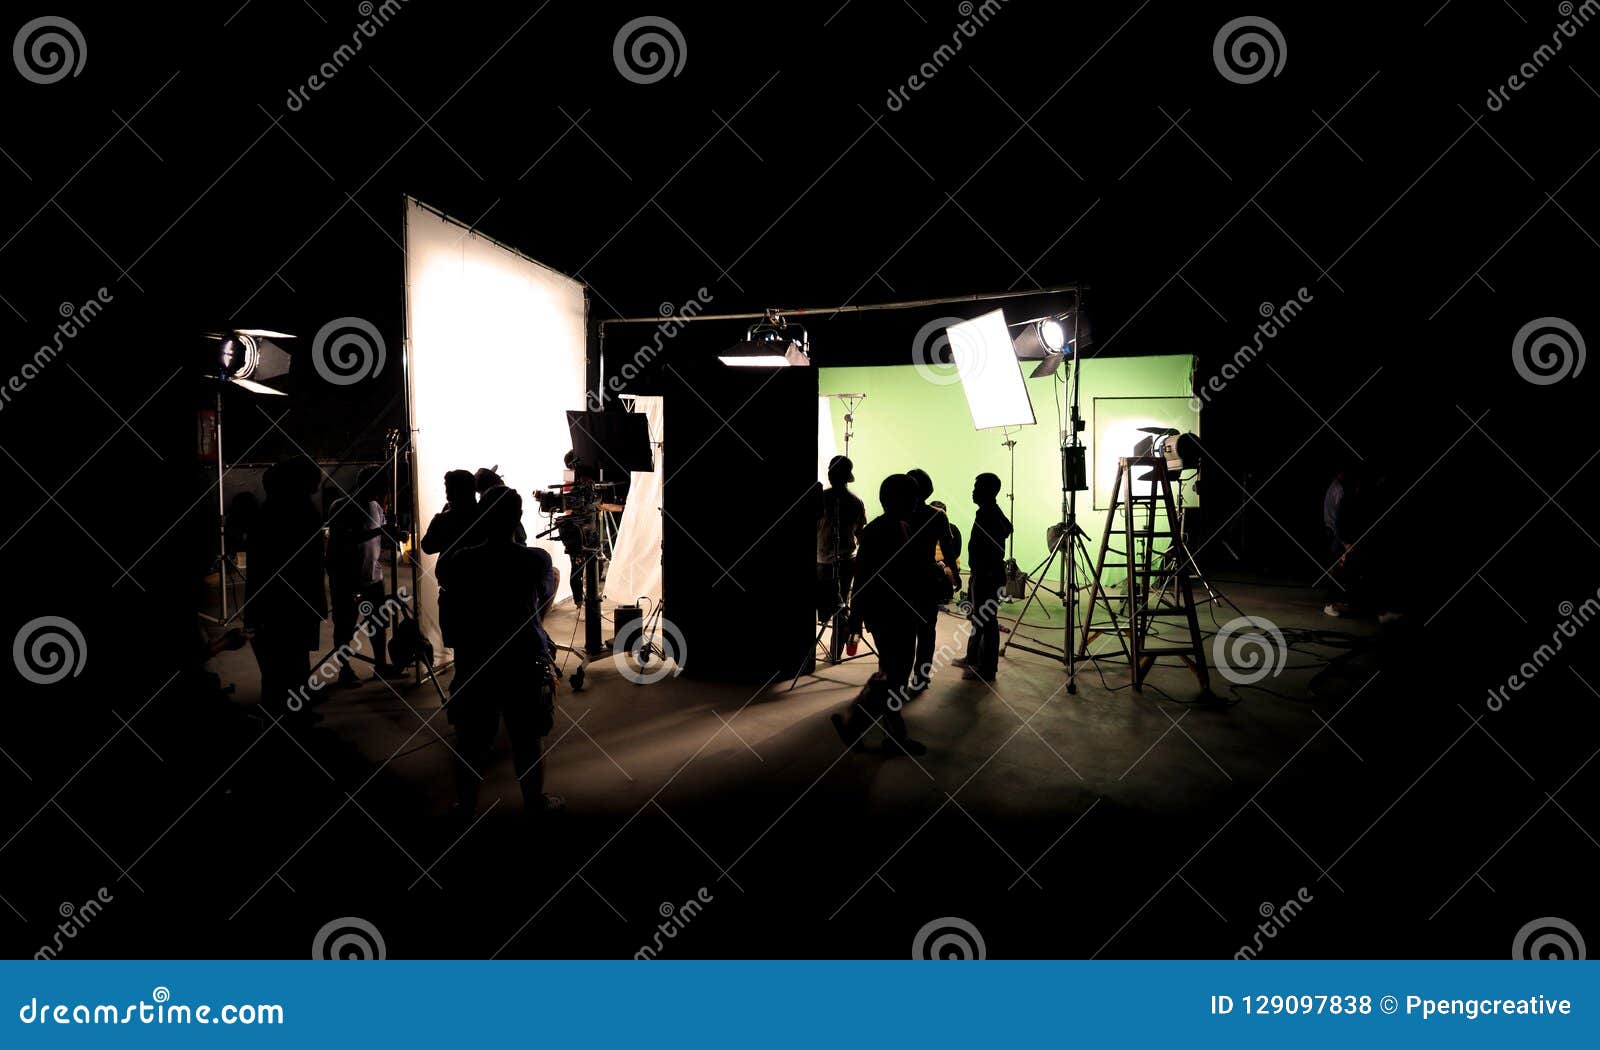 silhouette images of video production behind the scenes